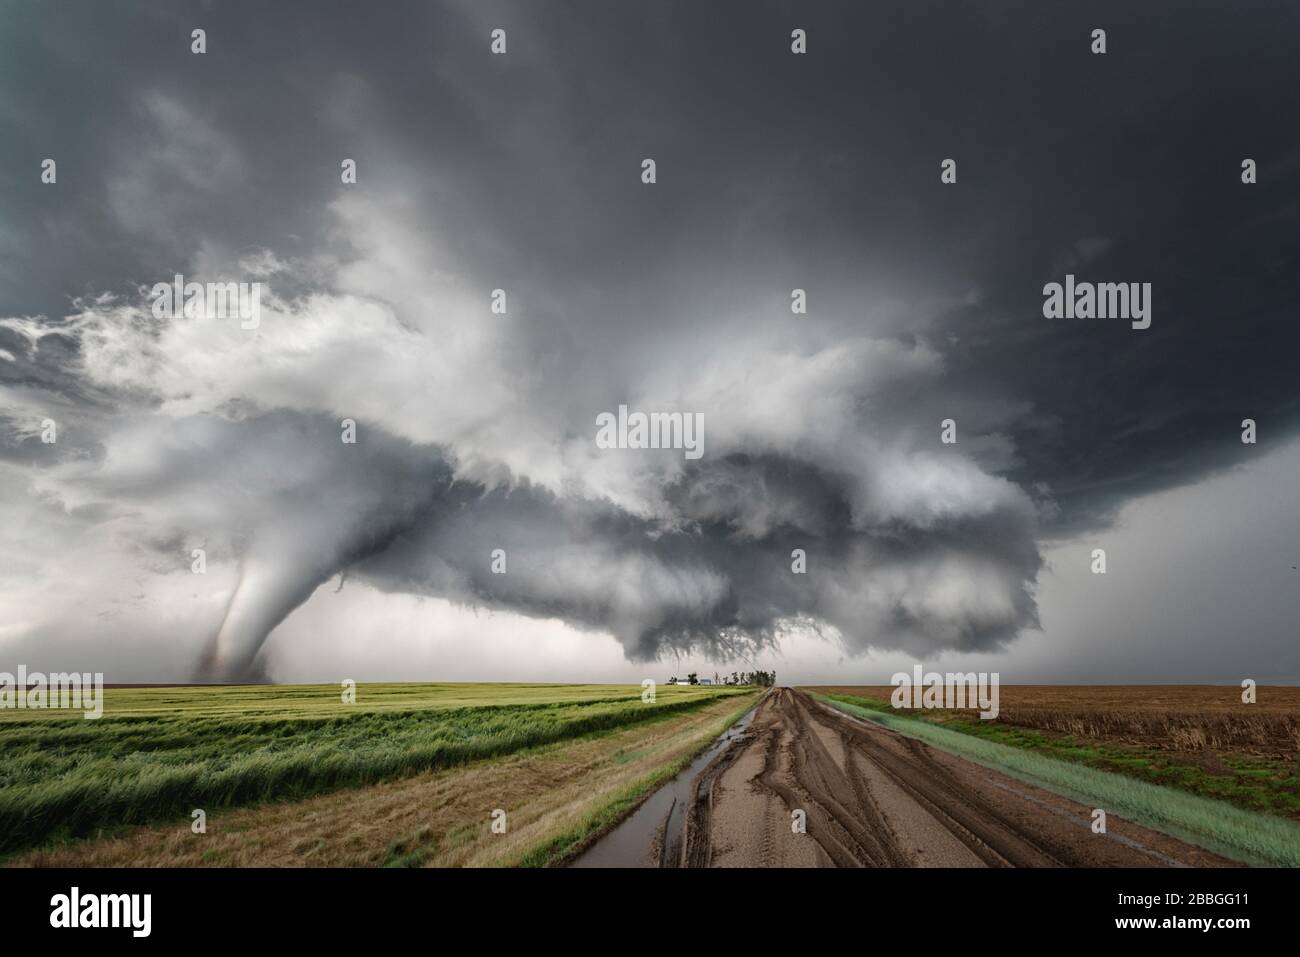 3 tornados touching down over a field in Dodge City, Kansas, United States Stock Photo